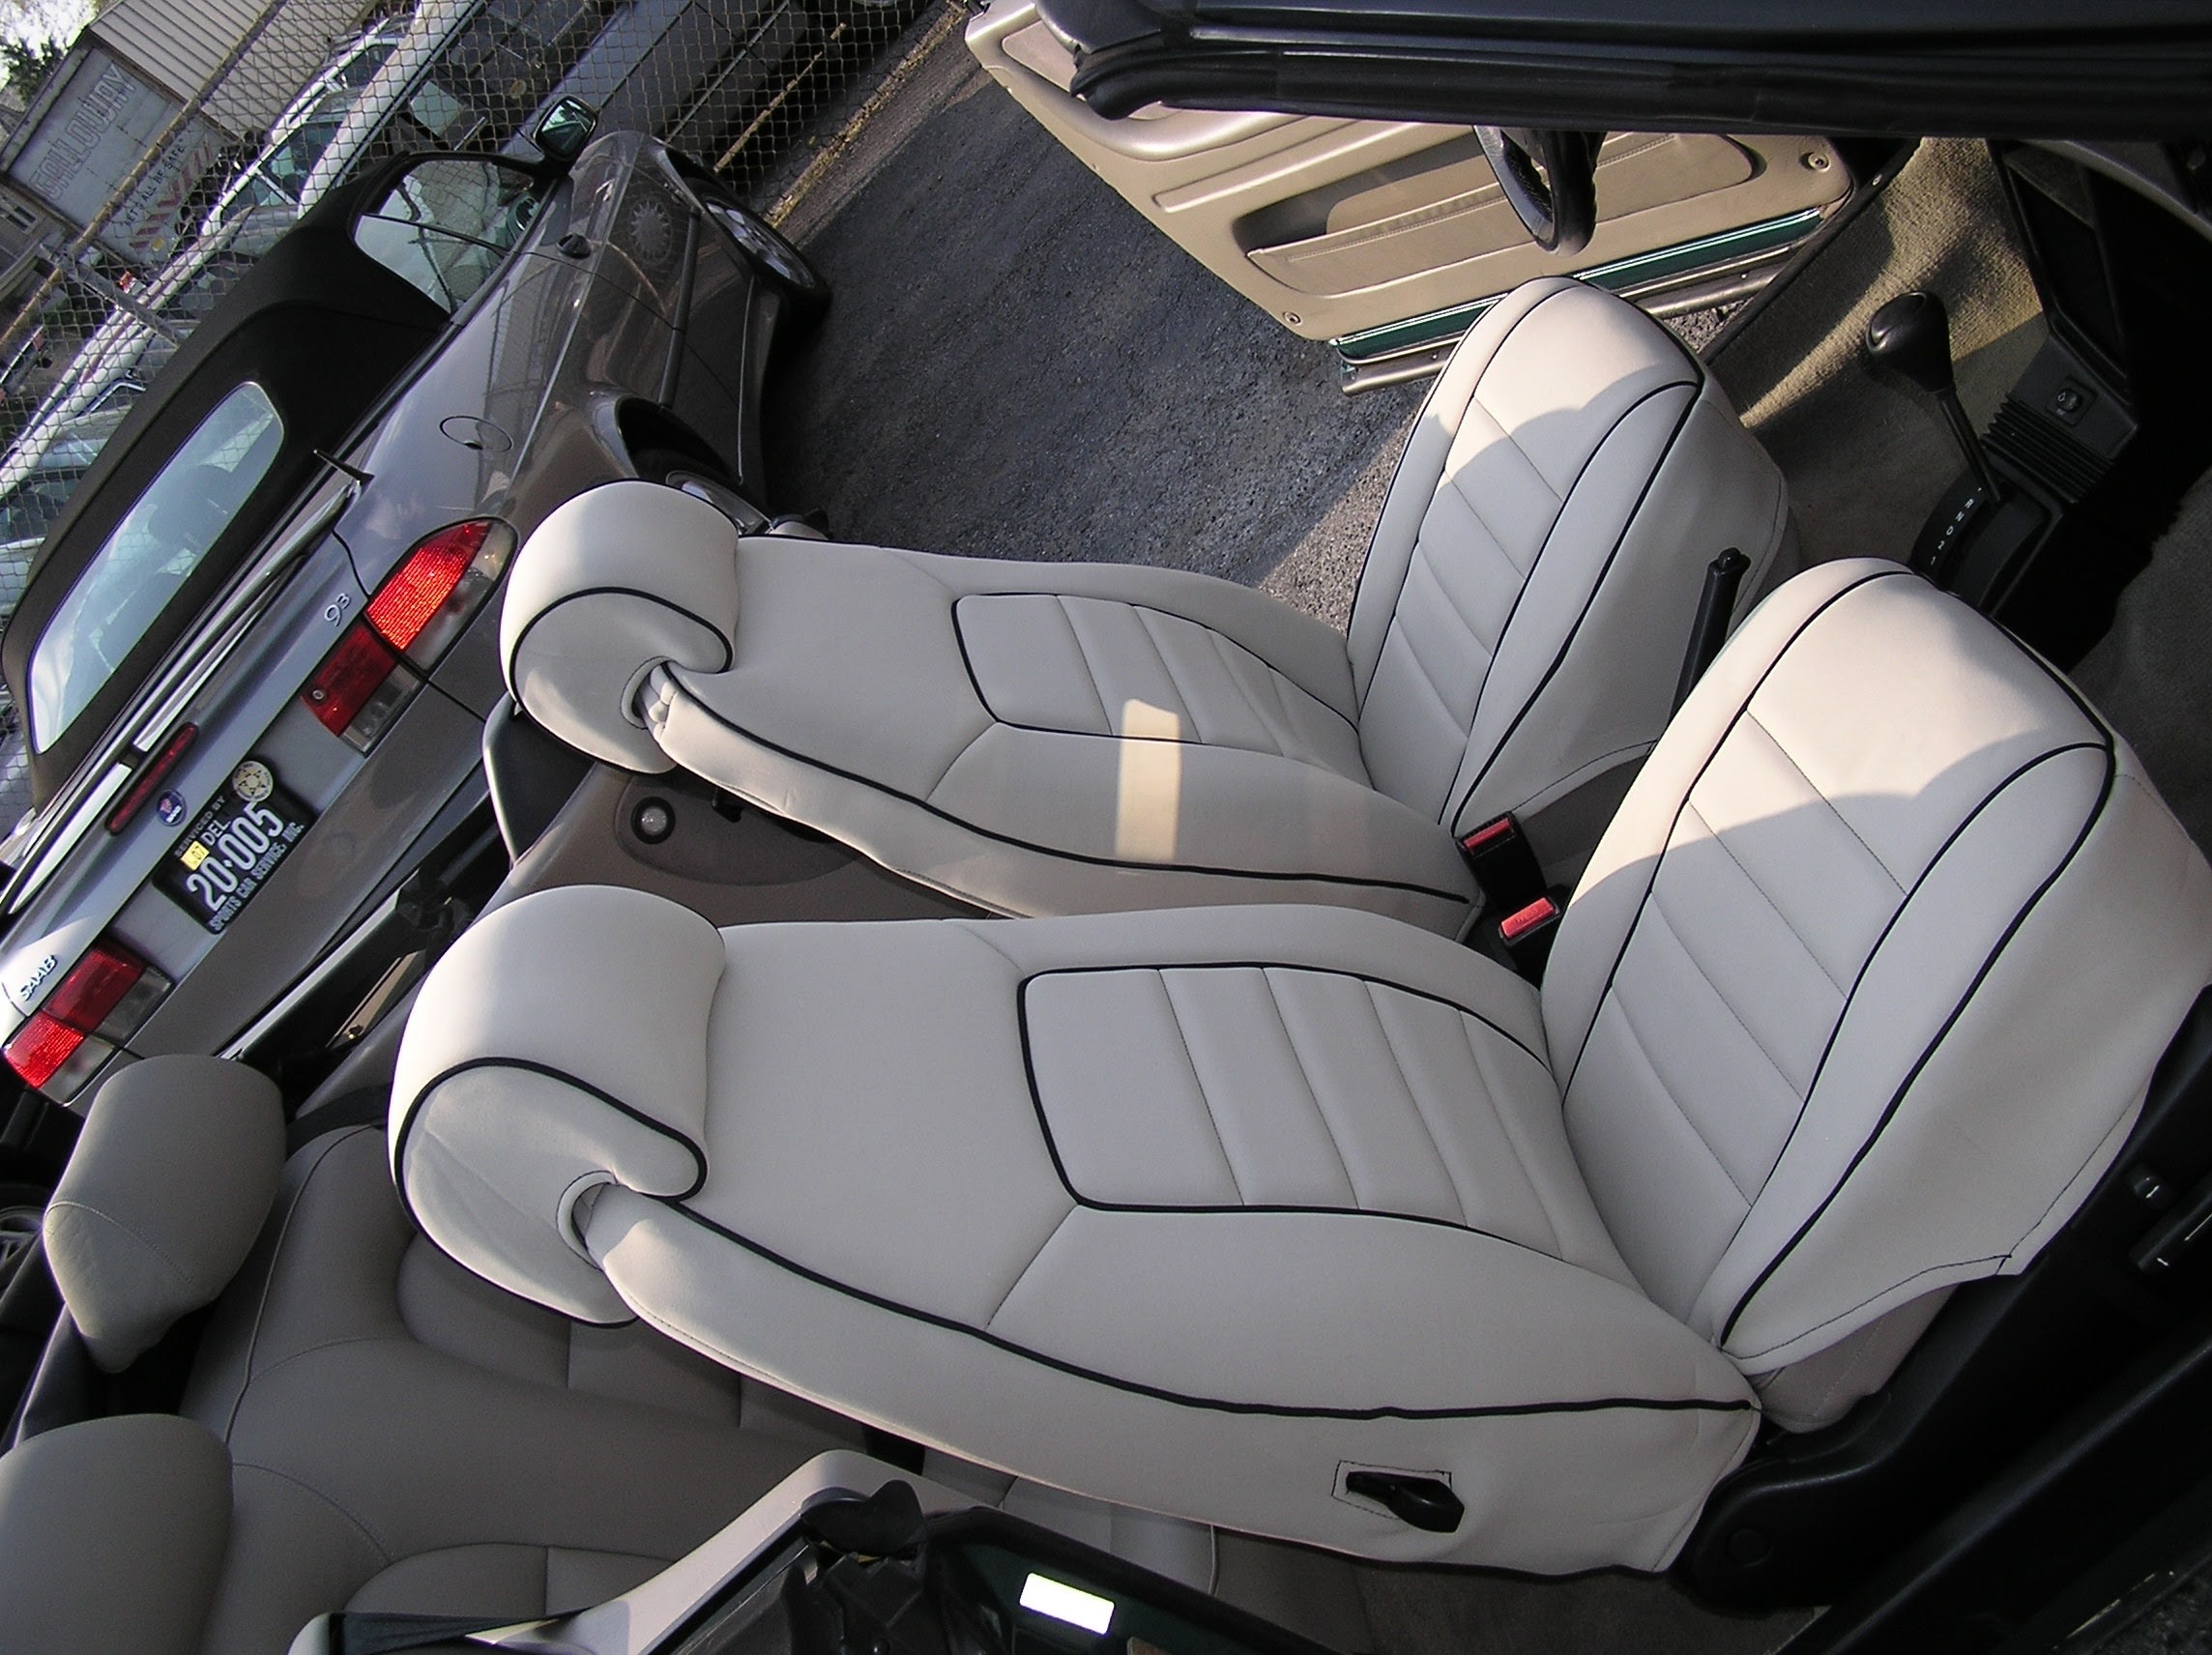 Stateofnine 1999 2003 Saab 9 3 Convertible Full Color Front Seat Covers 17 Tan Neoprene Set Of 2 With Headrests - 2005 Saab 9 3 Convertible Seat Covers